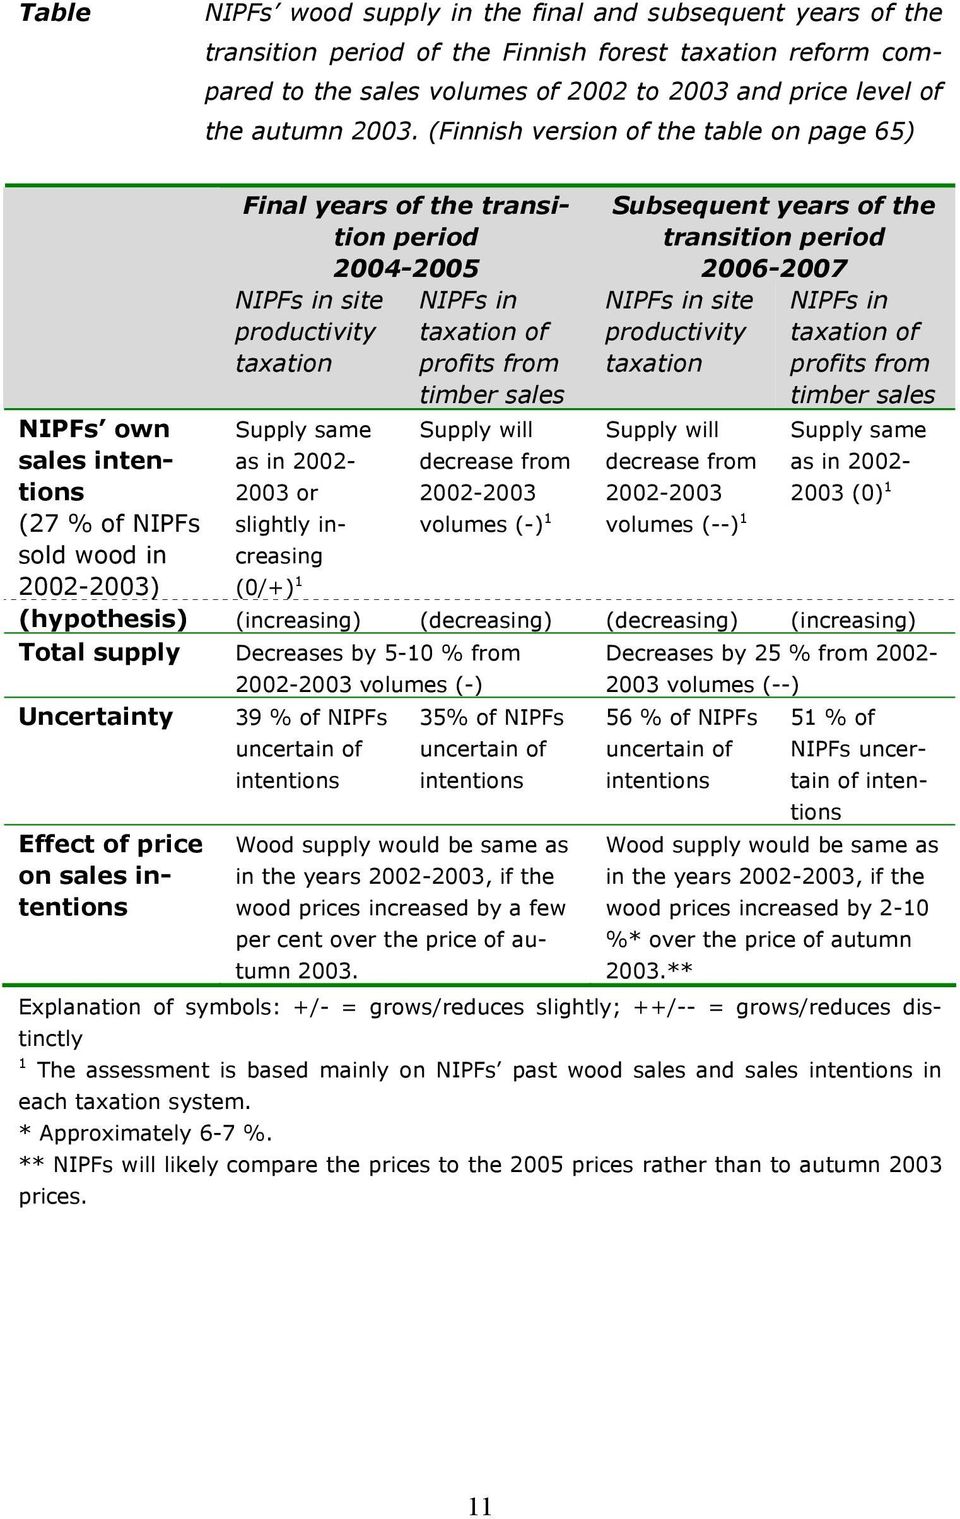 the transition period 2006-2007 NIPFs in site productivity taxation NIPFs in taxation of profits from timber sales NIPFs own sales intentions Supply same as in 2002-2003 or Supply will decrease from